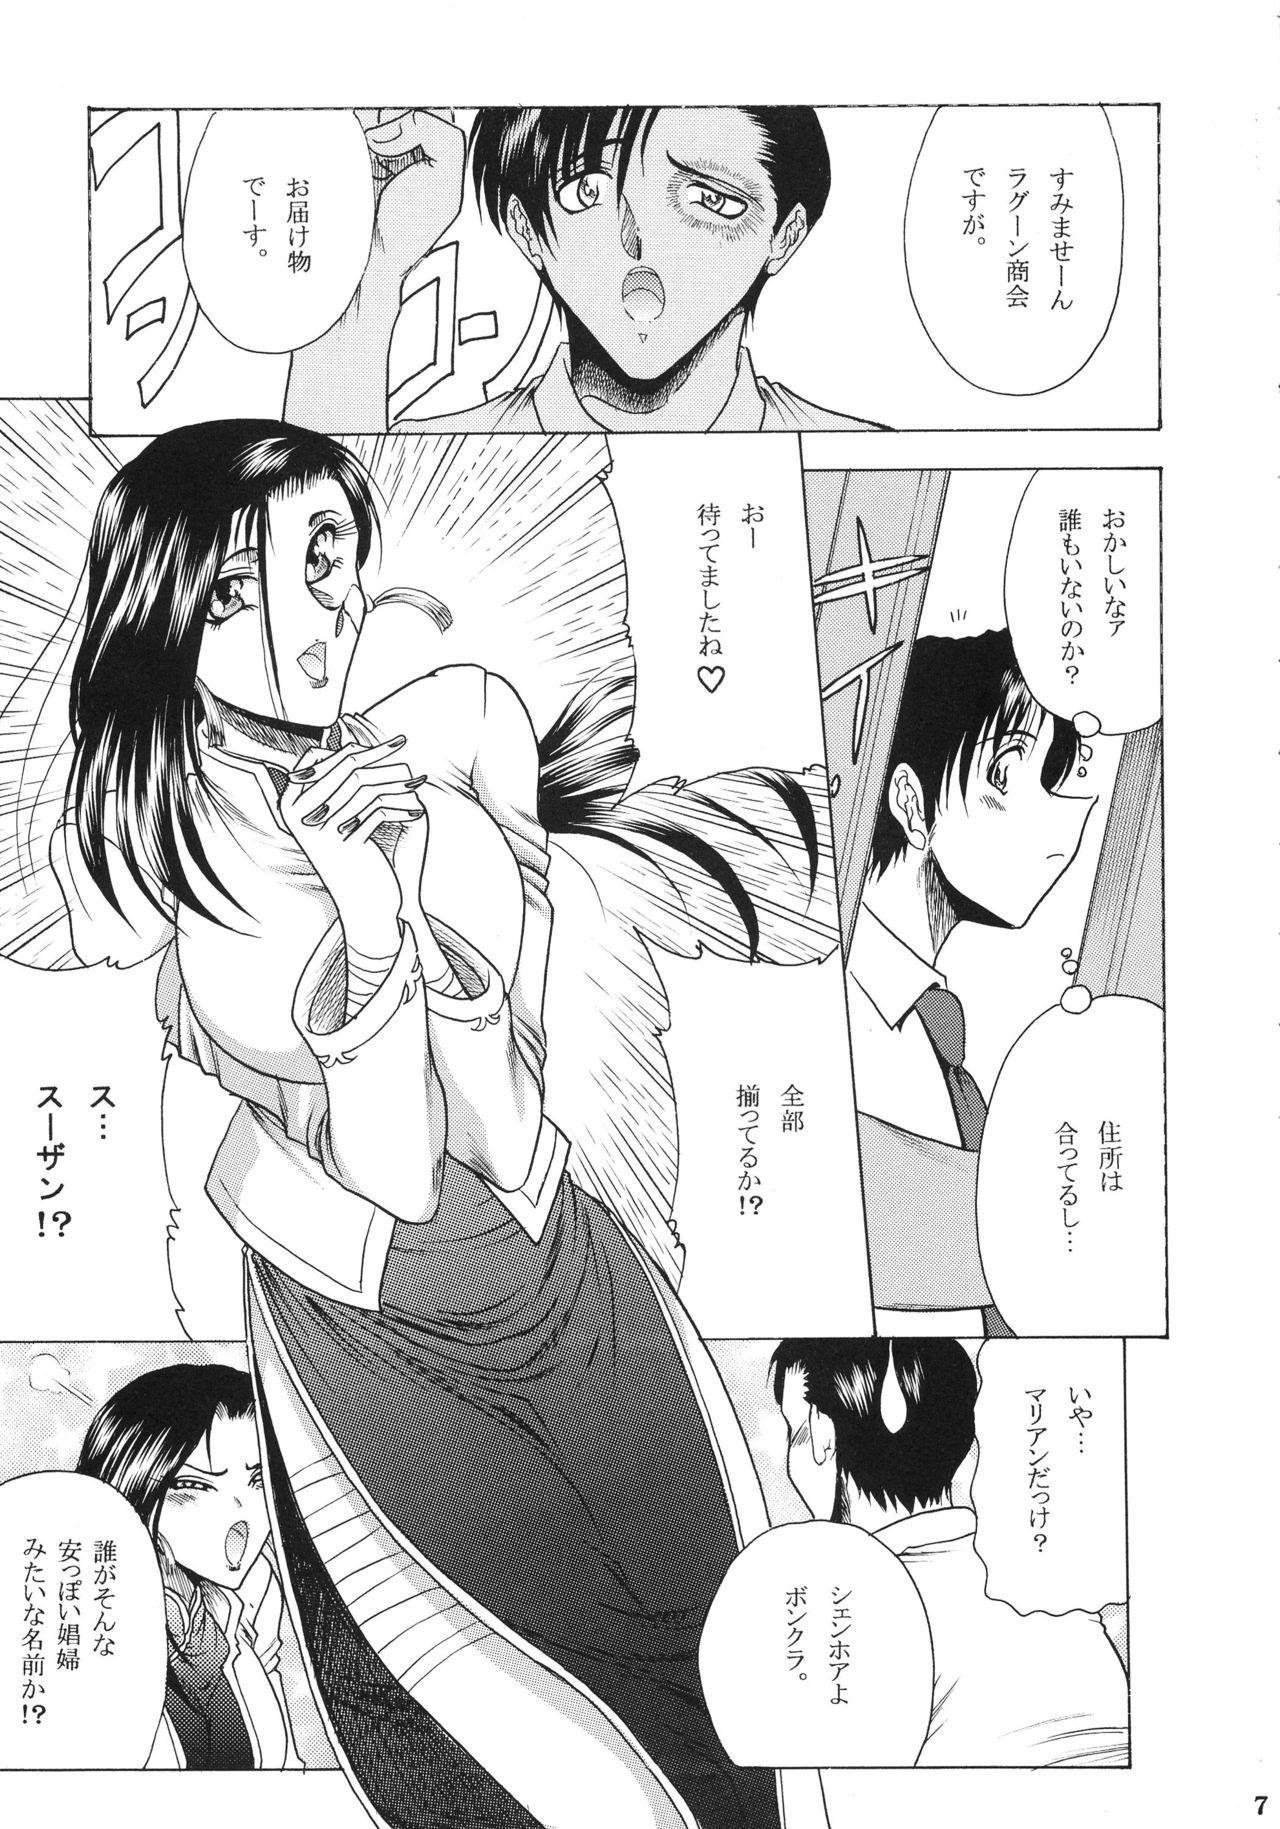 Blowjob ZONE 38 China Syndrome - Black lagoon Speculum - Page 6